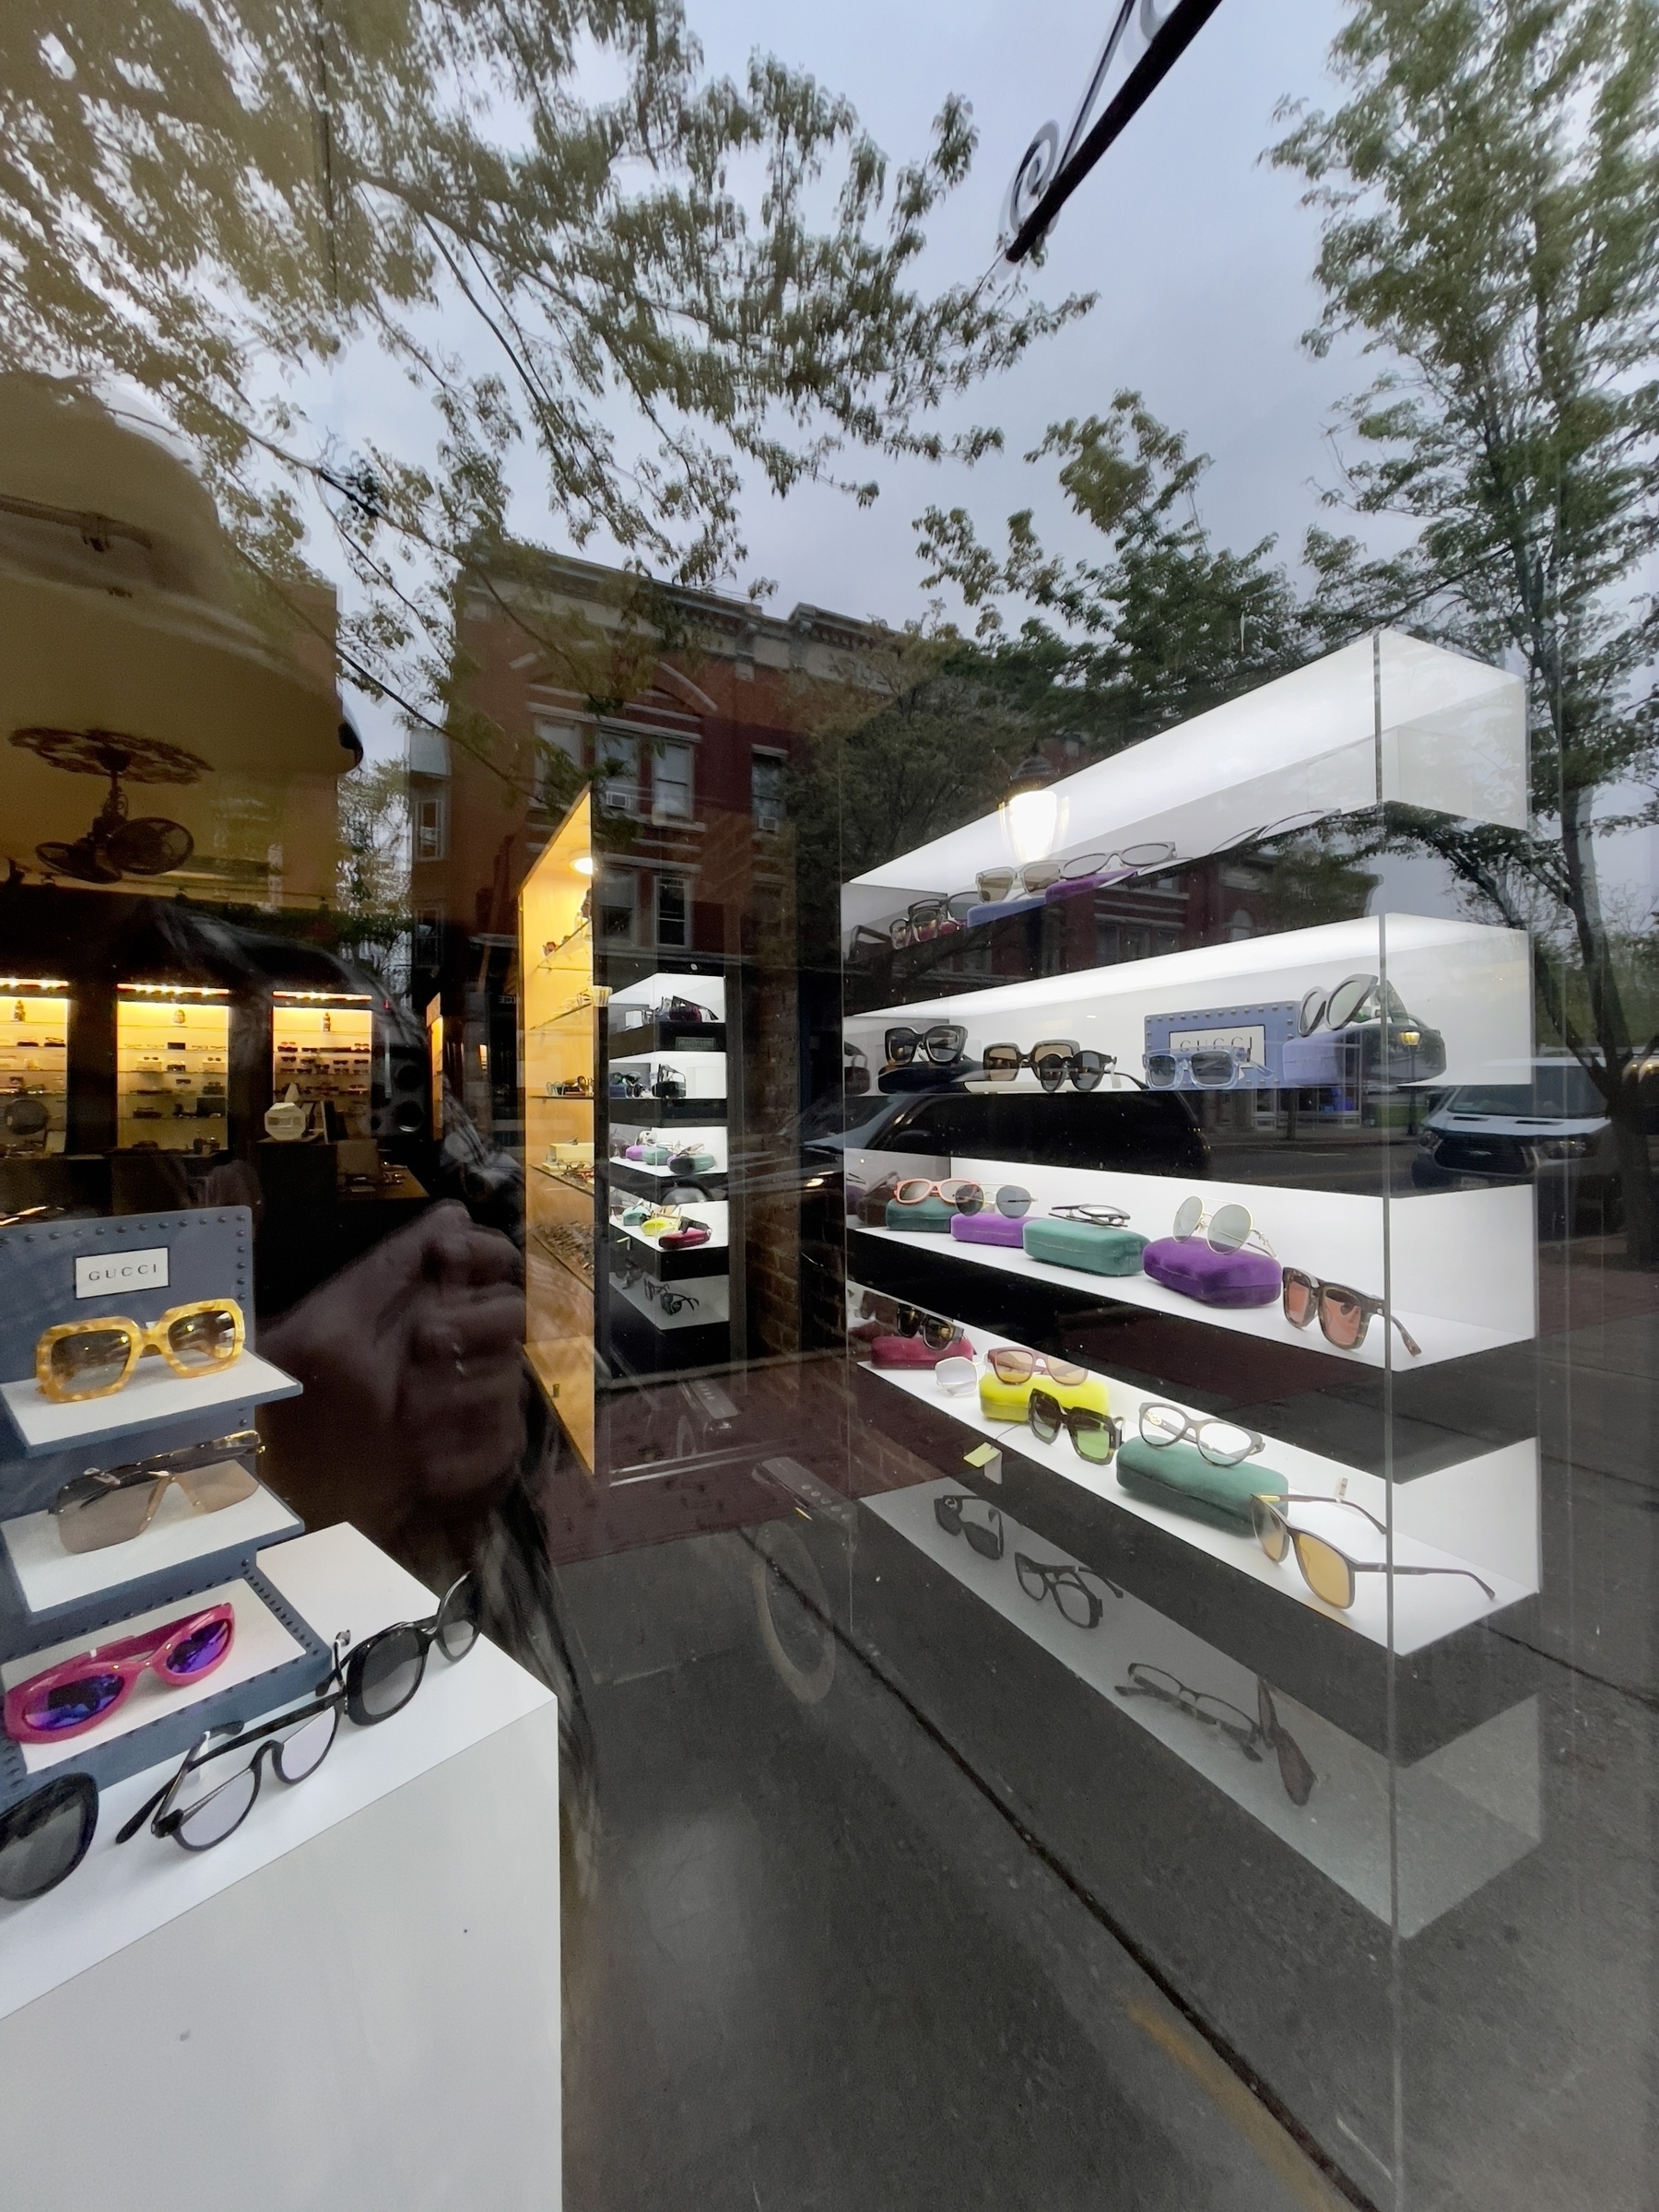 Opticians display cases with buildings reflected in the window.